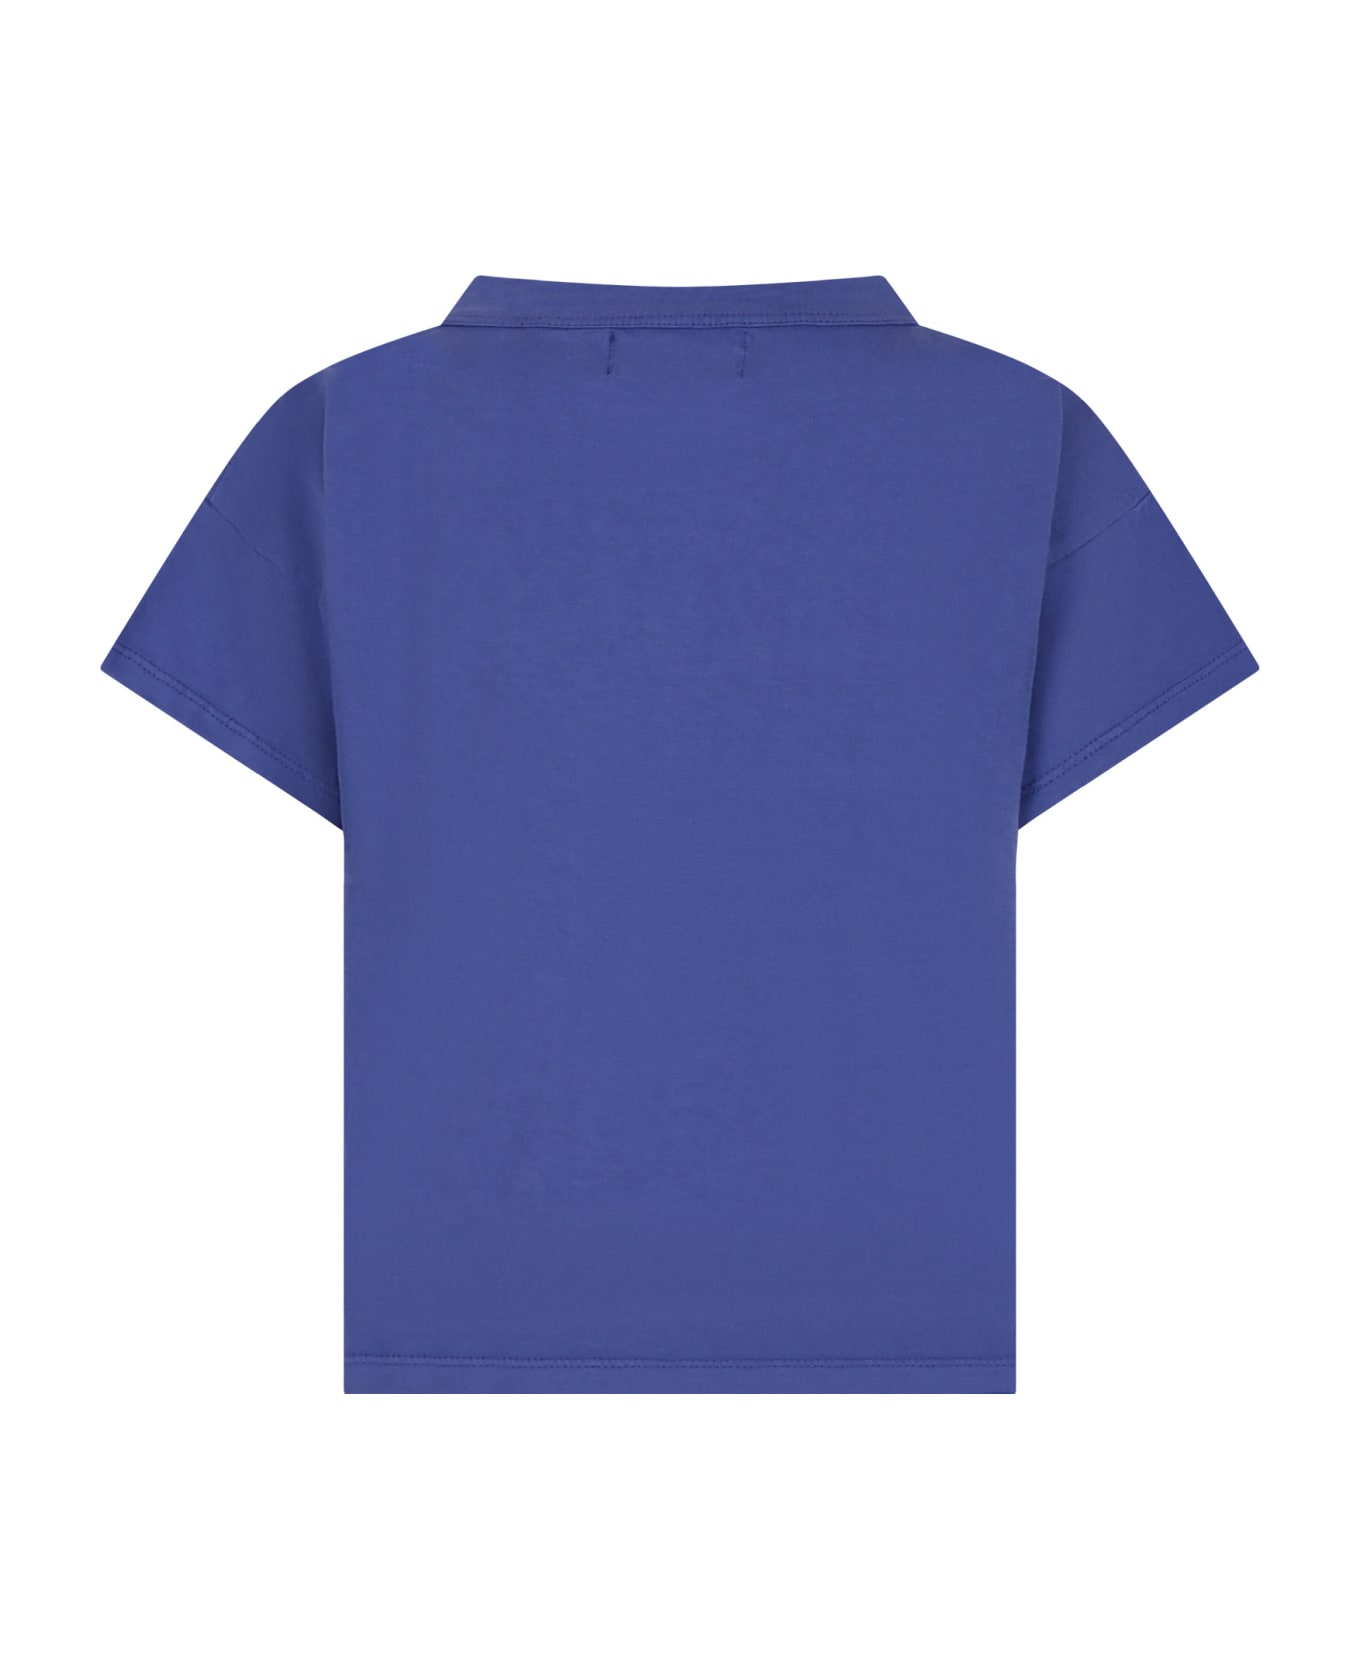 Bobo Choses Blue T-shirt For Kids With Guitar - Blue Tシャツ＆ポロシャツ